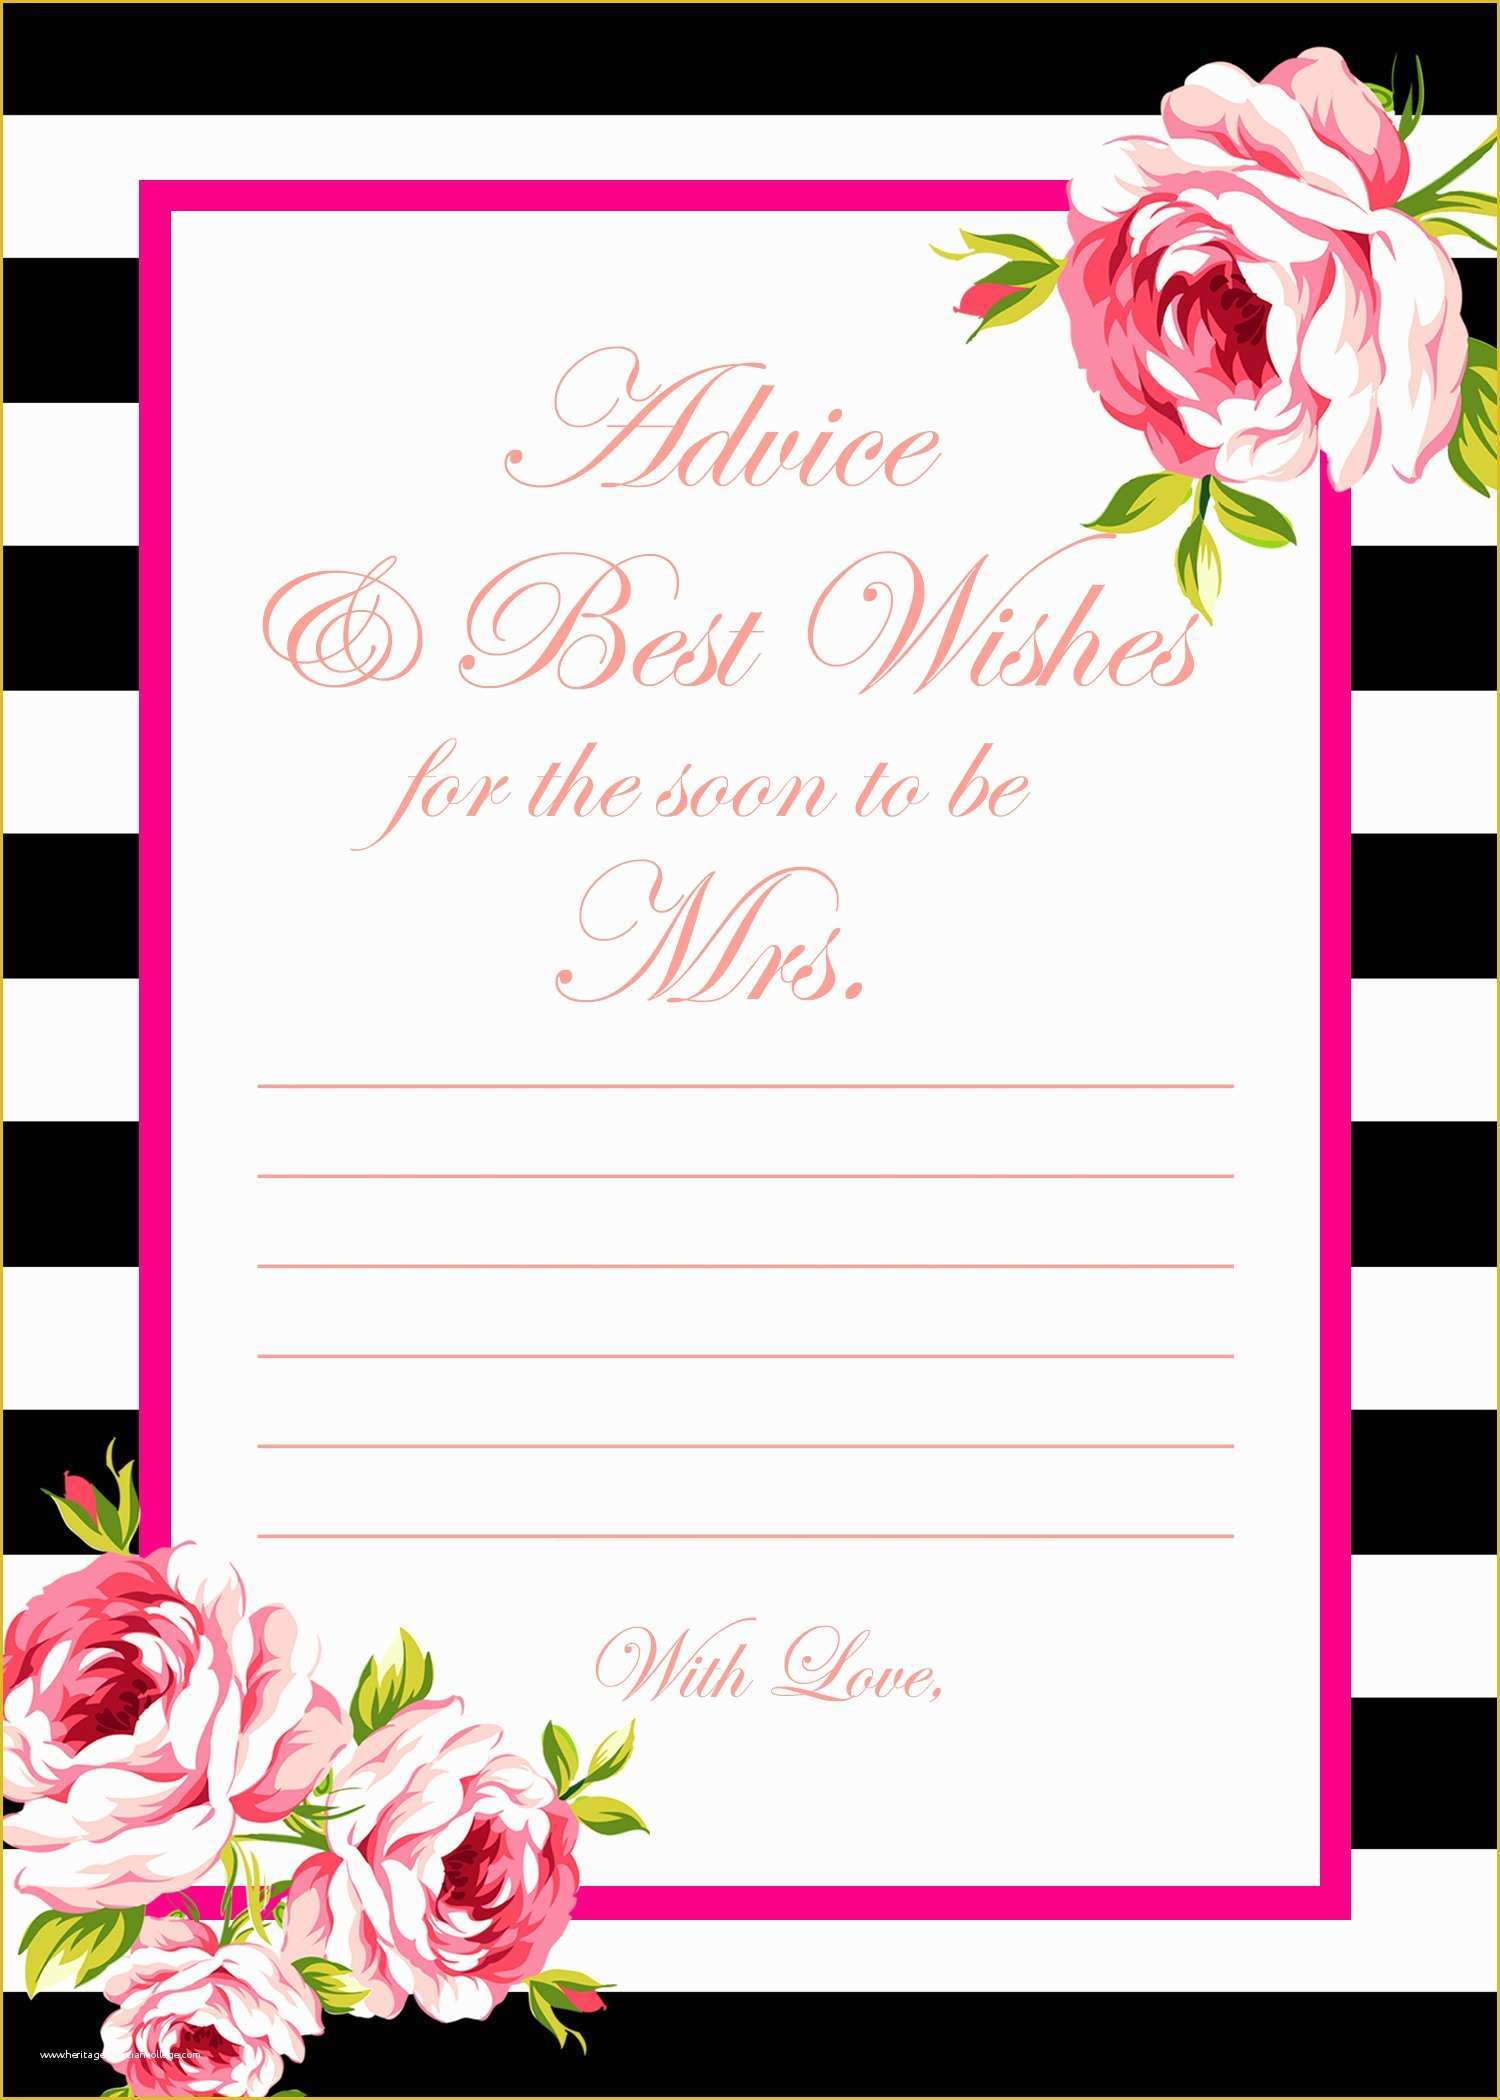 Wedding Shower Invitations Templates Free Download Of 2 Free Printable Games Archives Bridal Shower Ideas themes